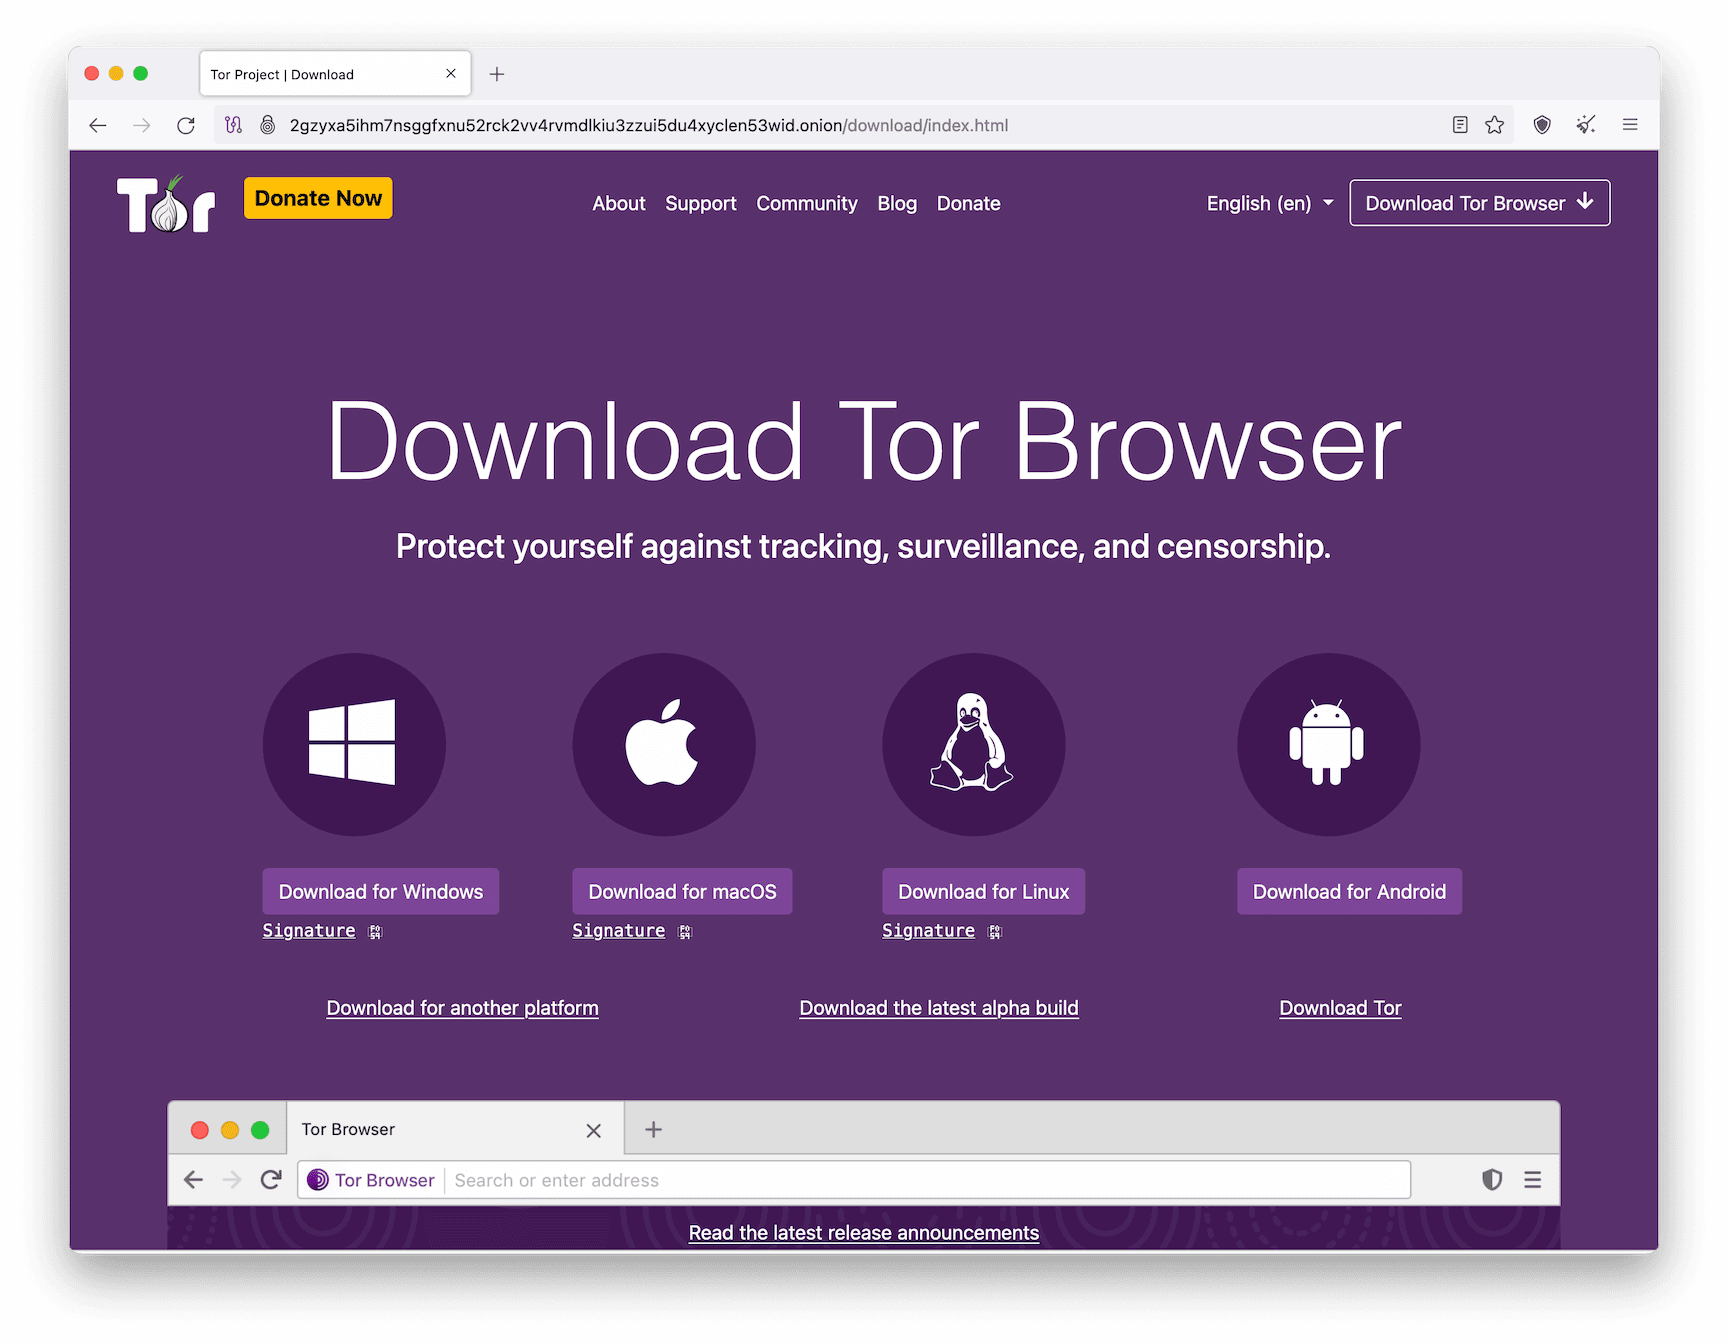 The different devices the Tor Browser is available on.